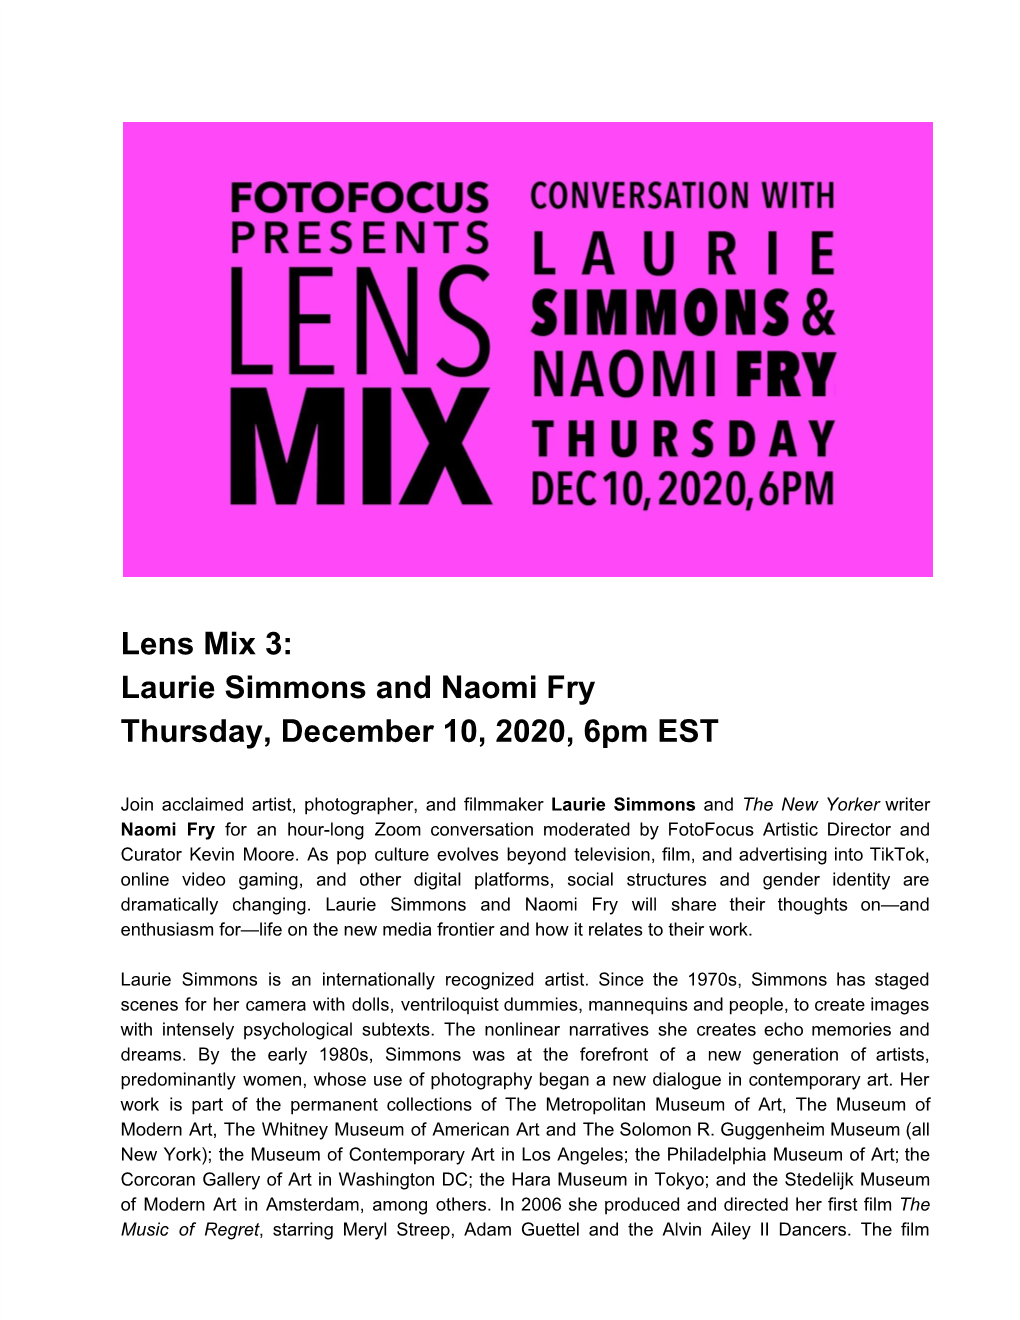 Laurie Simmons and Naomi Fry Thursday, December 10, 2020, 6Pm EST